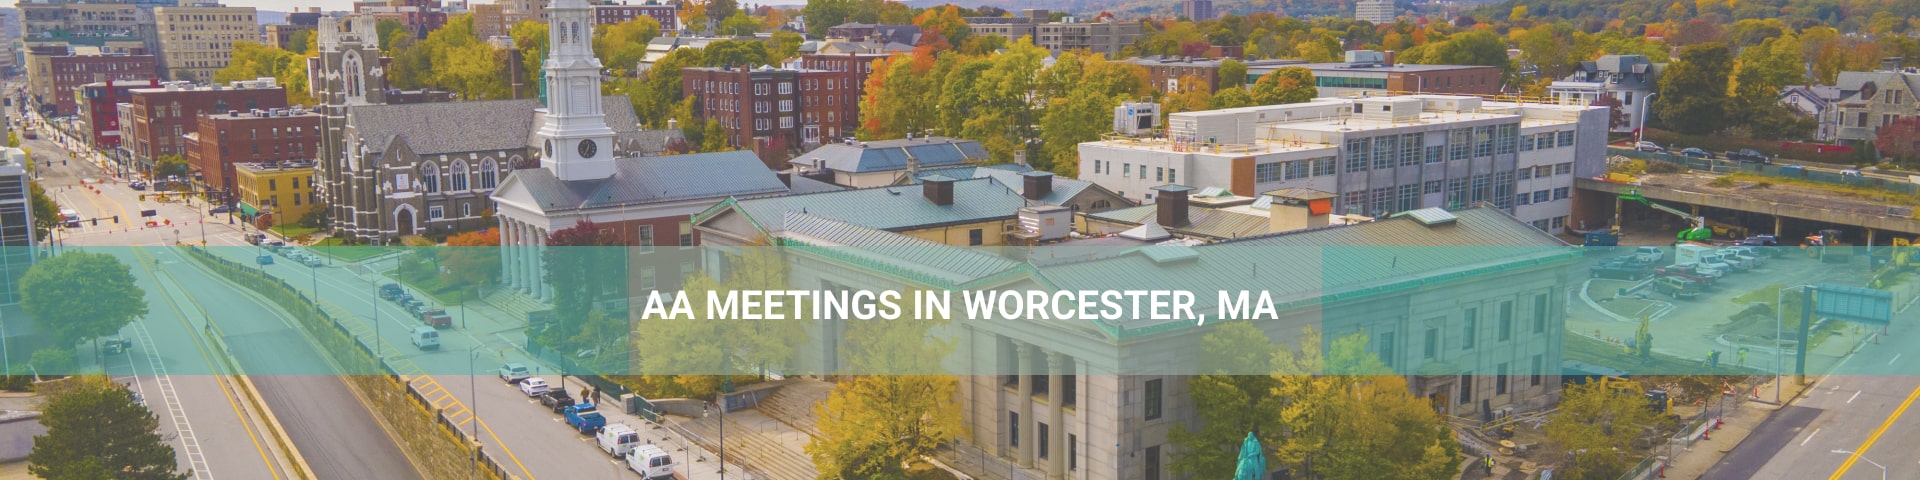 Old Worcester District Court aerial view.